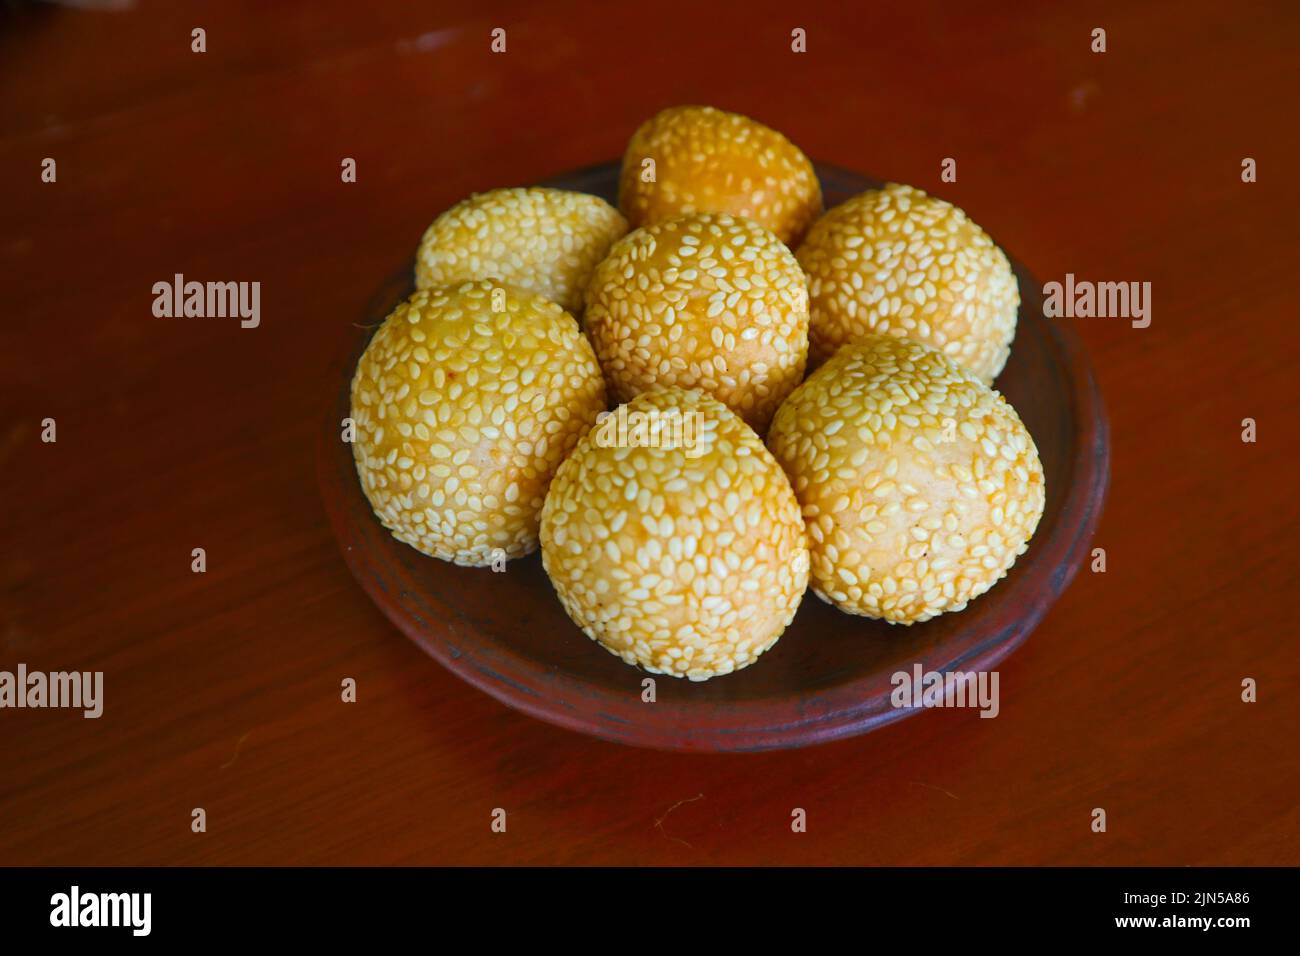 'onde-onde or sesame ball or Jian Dui is fried Chinese pastry made from glutinous rice flour and coated with sesame seeds filled with bean paste. isol Stock Photo